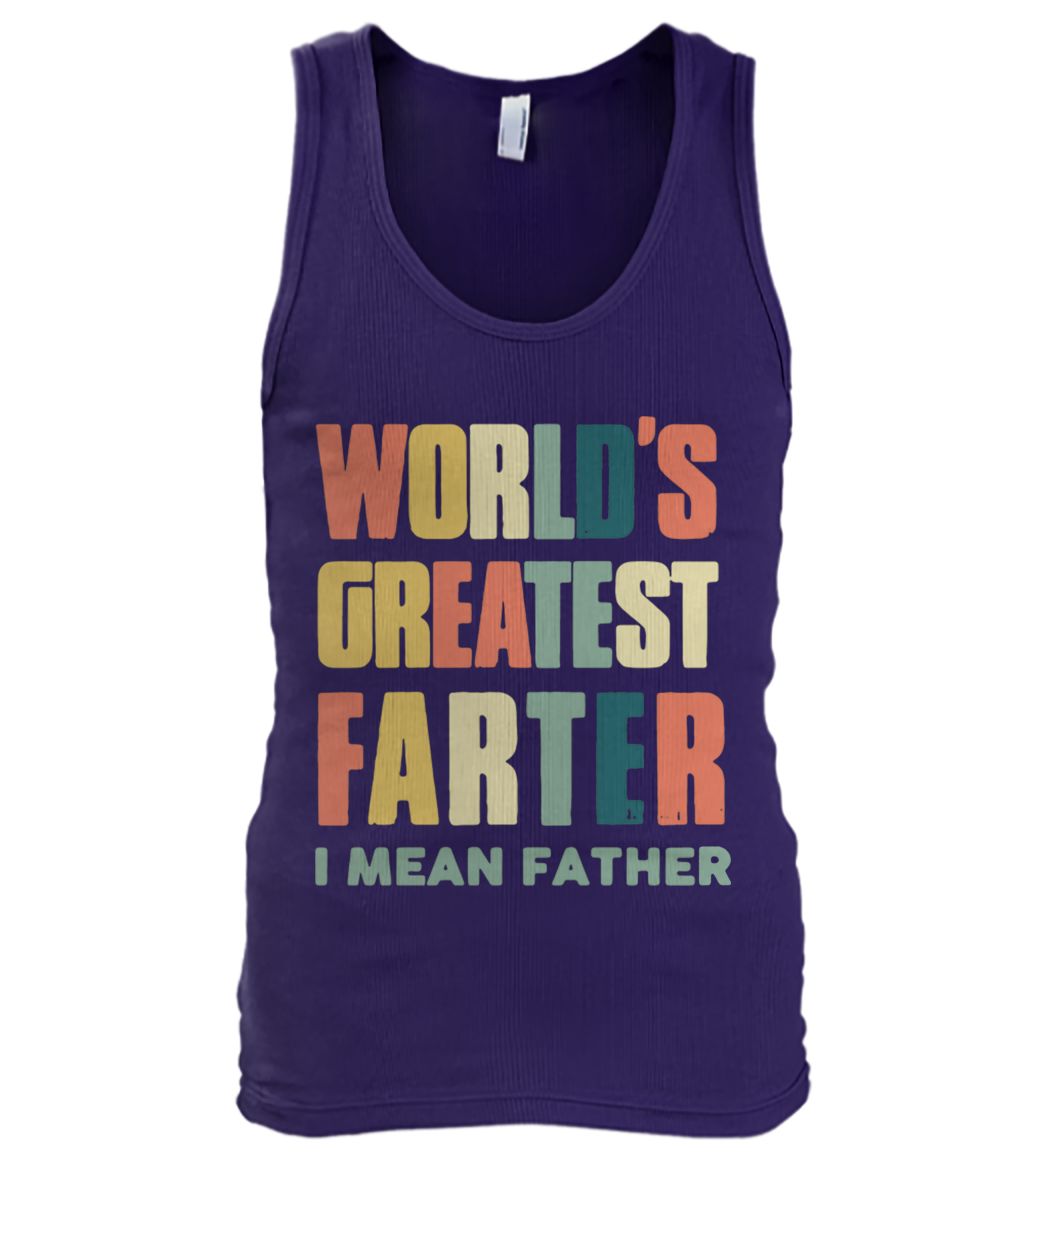 Vintage world's greatest farter I mean father men's tank top